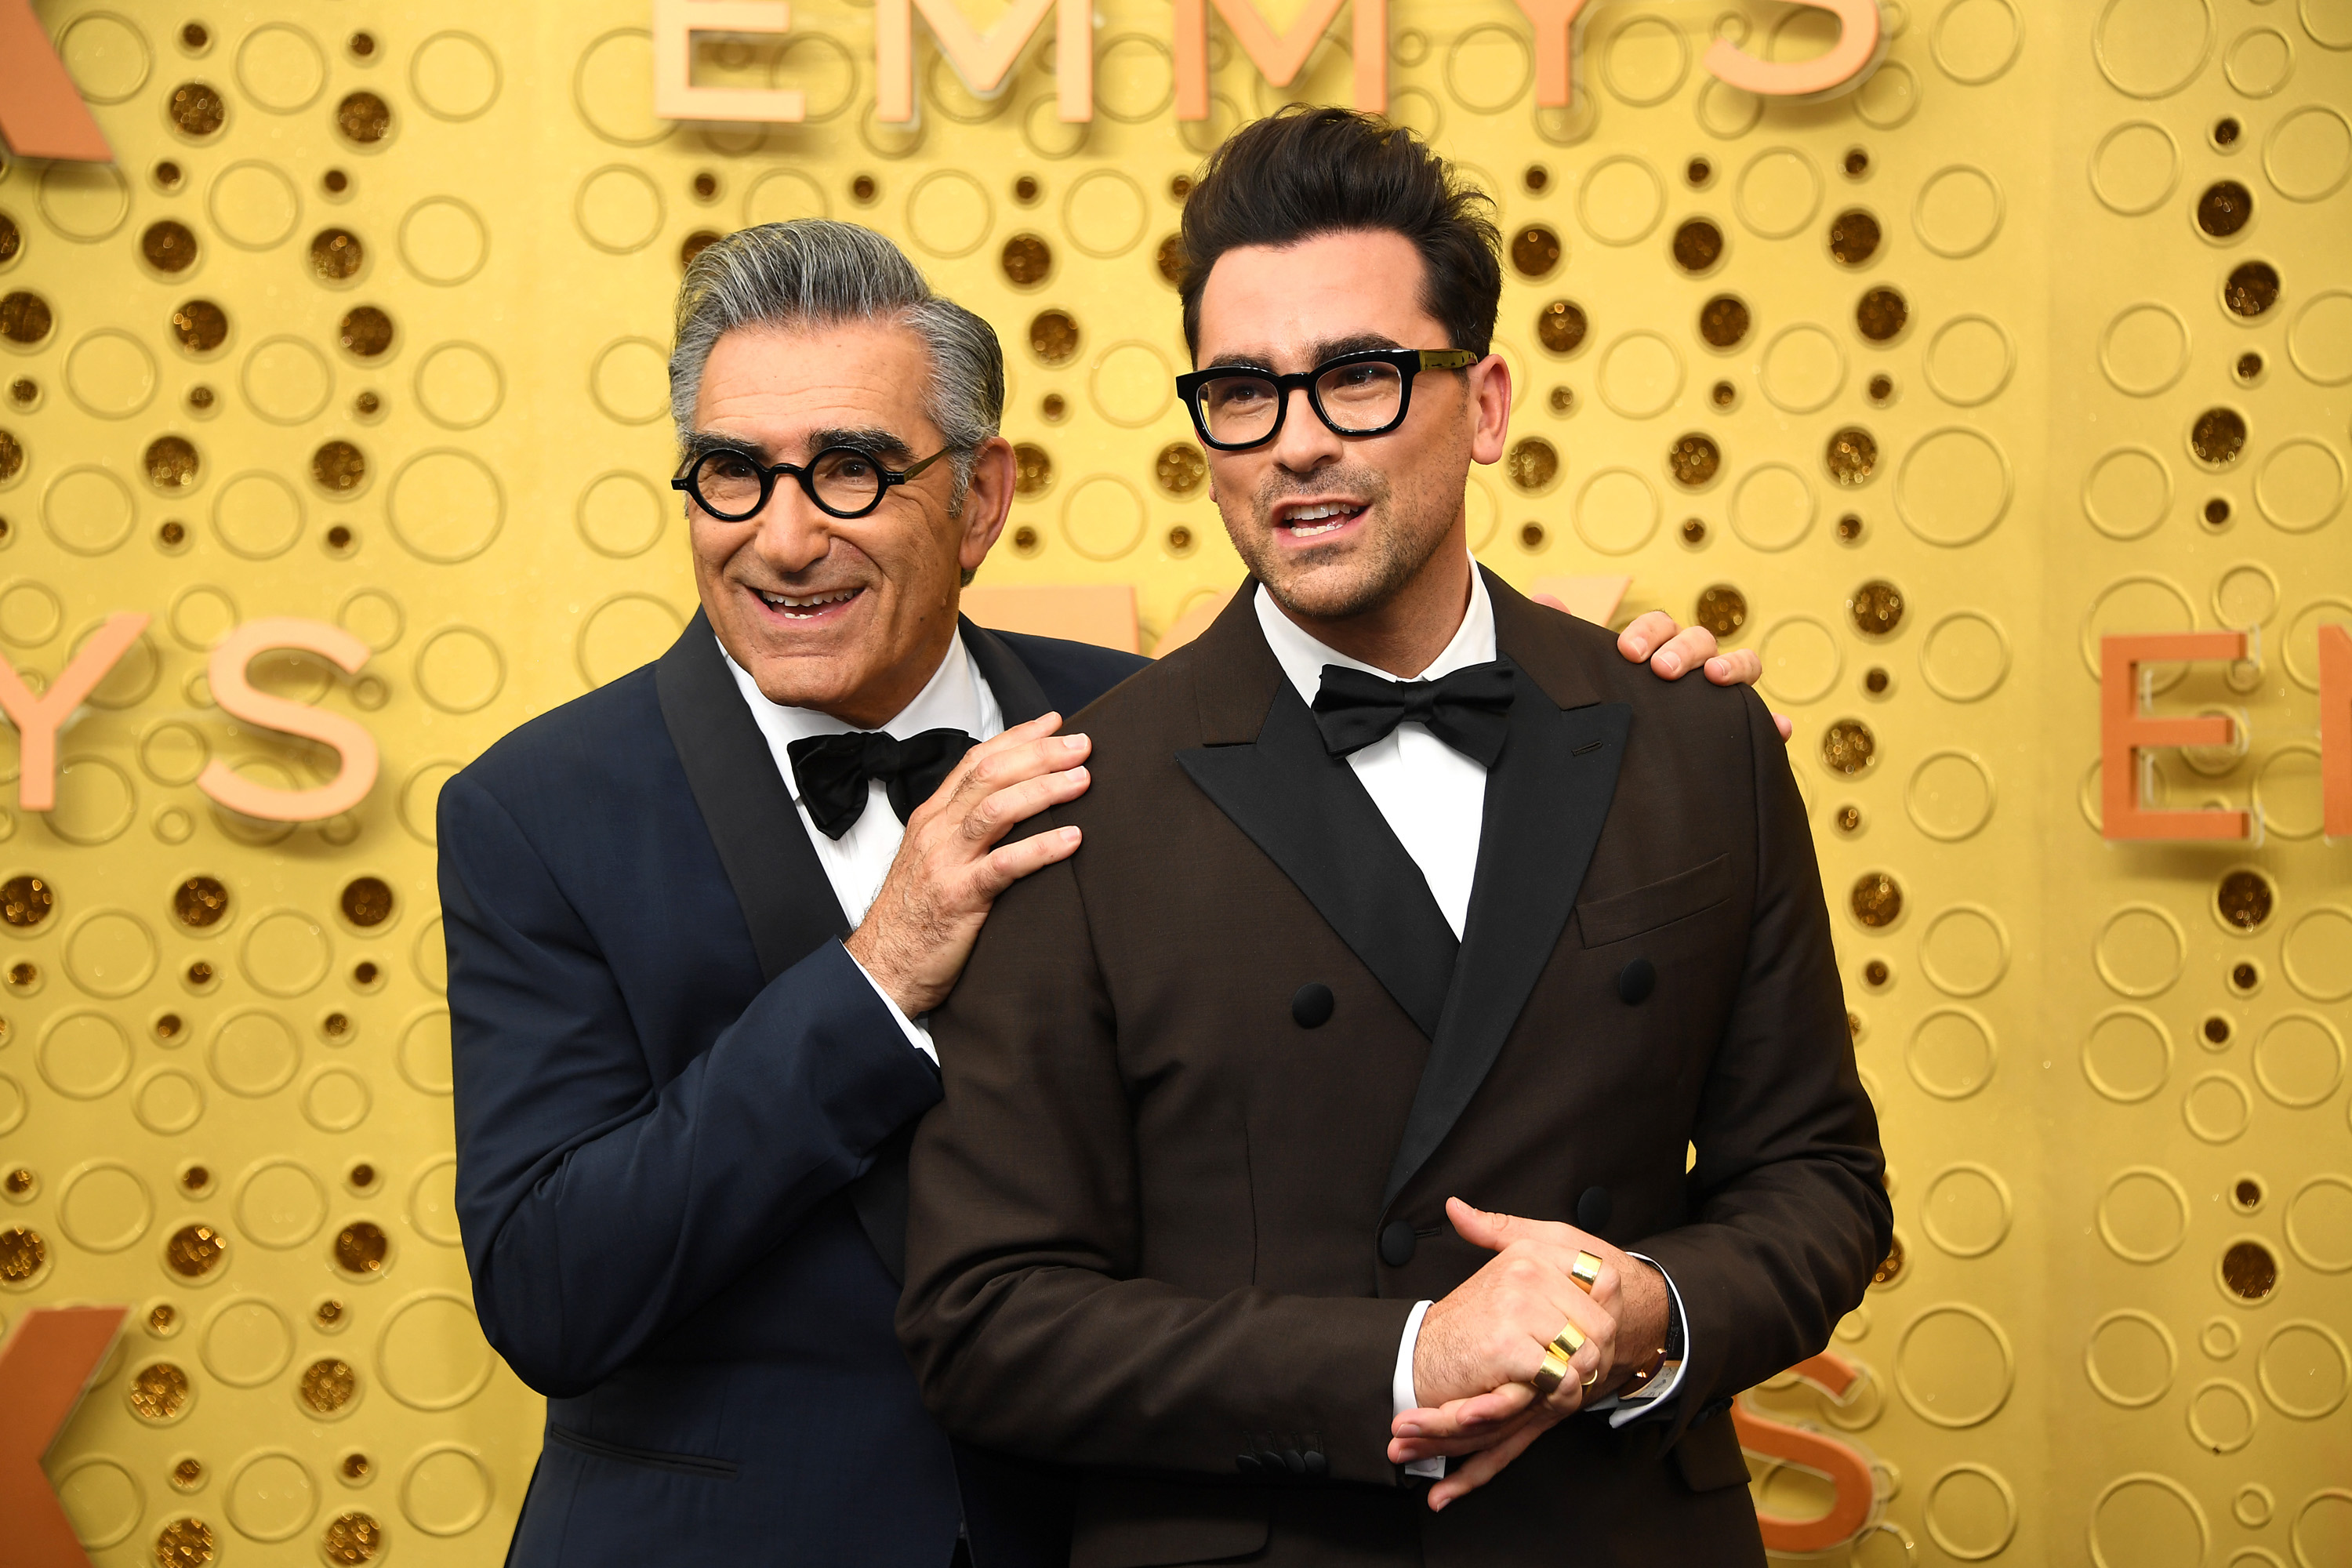 LOS ANGELES, CALIFORNIA - SEPTEMBER 22: Eugene Levy (L) and Dan Levy attend the 71st Emmy Awards at Microsoft Theater on September 22, 2019 in Los Angeles, California.